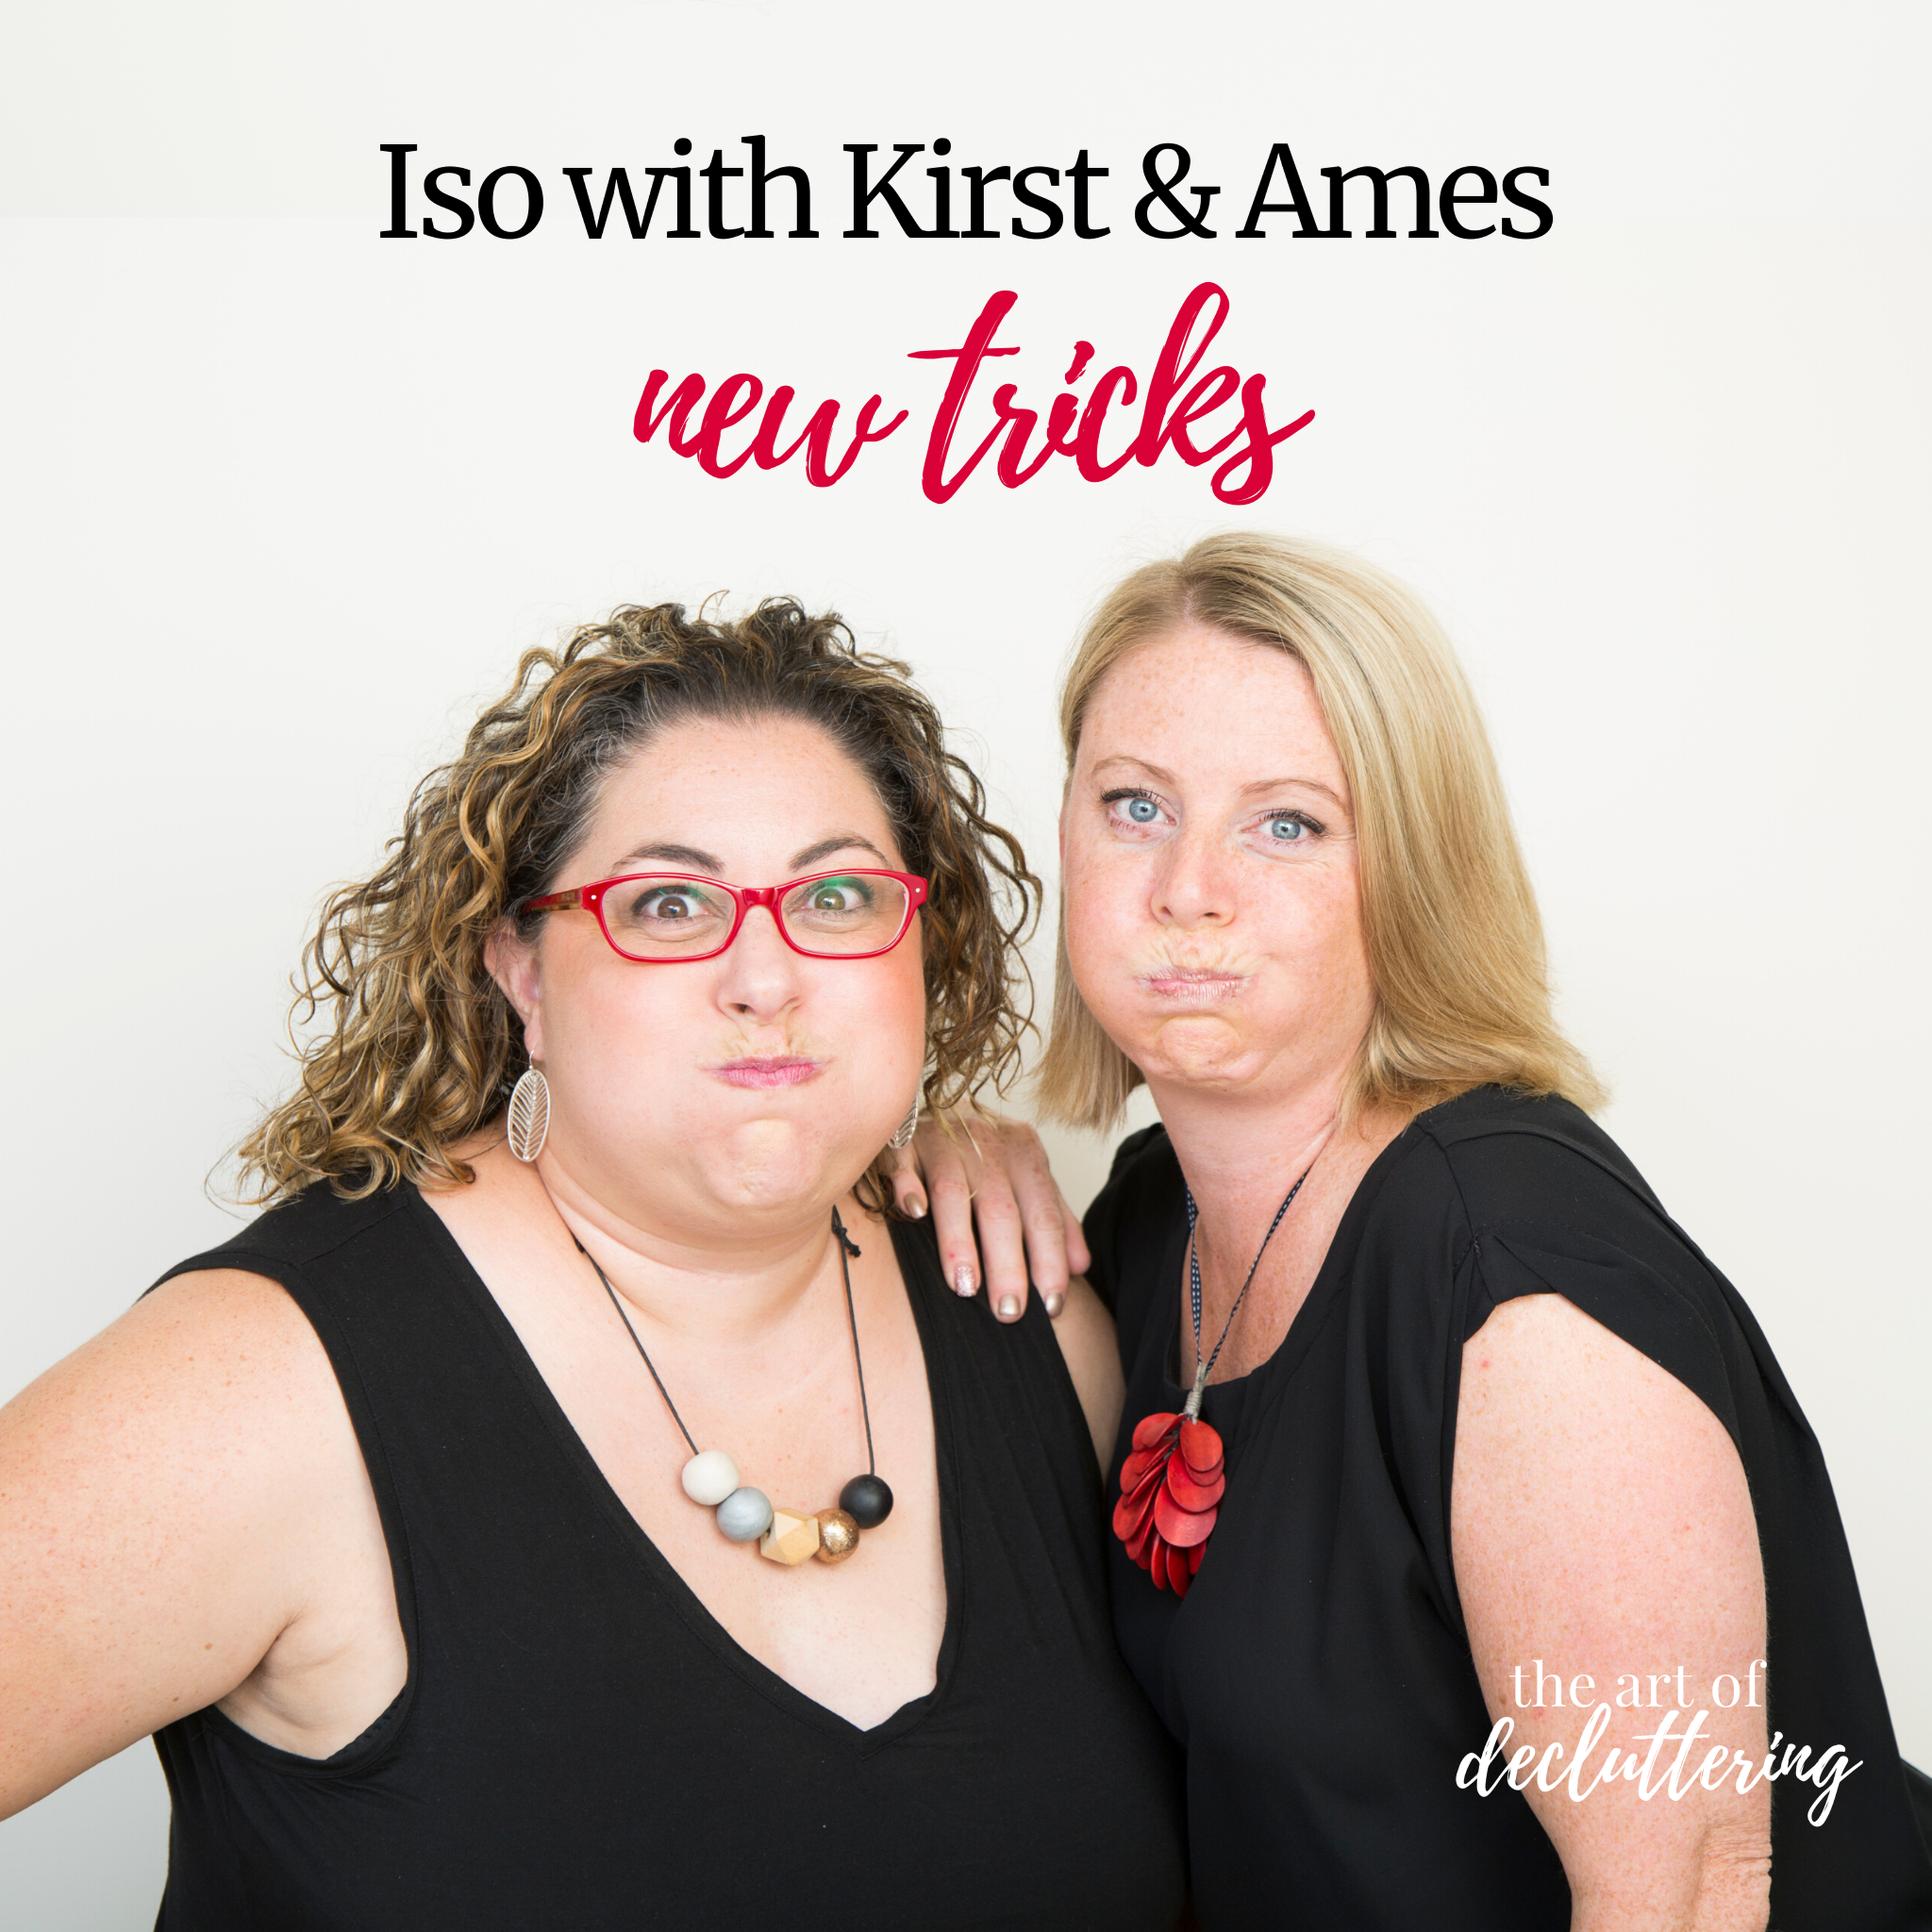 Iso with Kirst & Ames - New Tricks